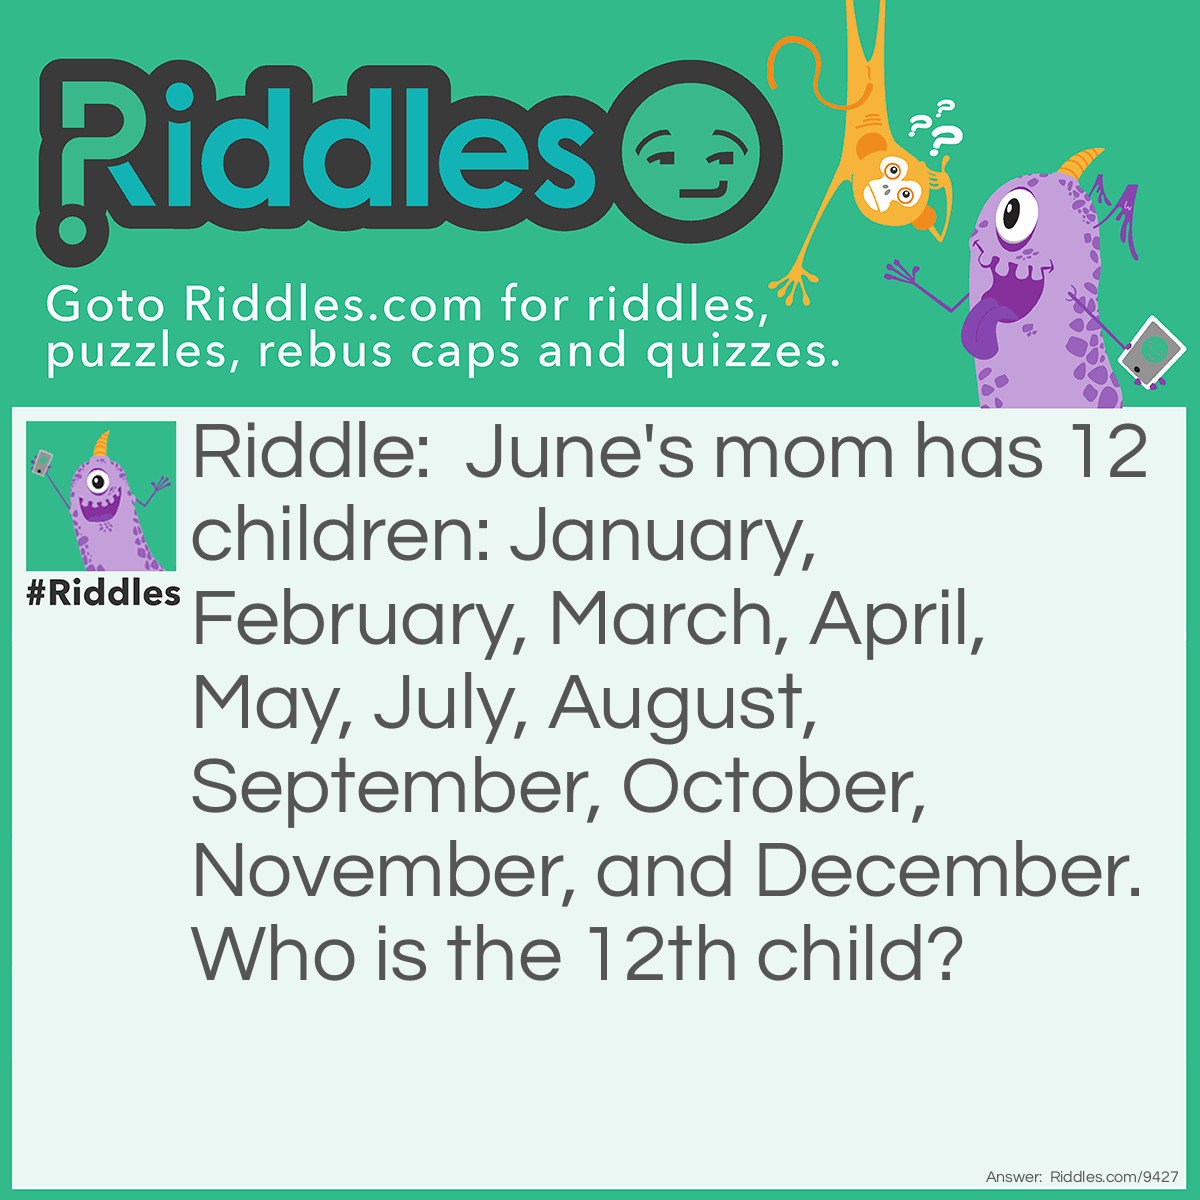 Riddle: June's mom has 12 children: January, February, March, April, May, July, August, September, October, November, and December. Who is the 12th child? Answer: It's June!